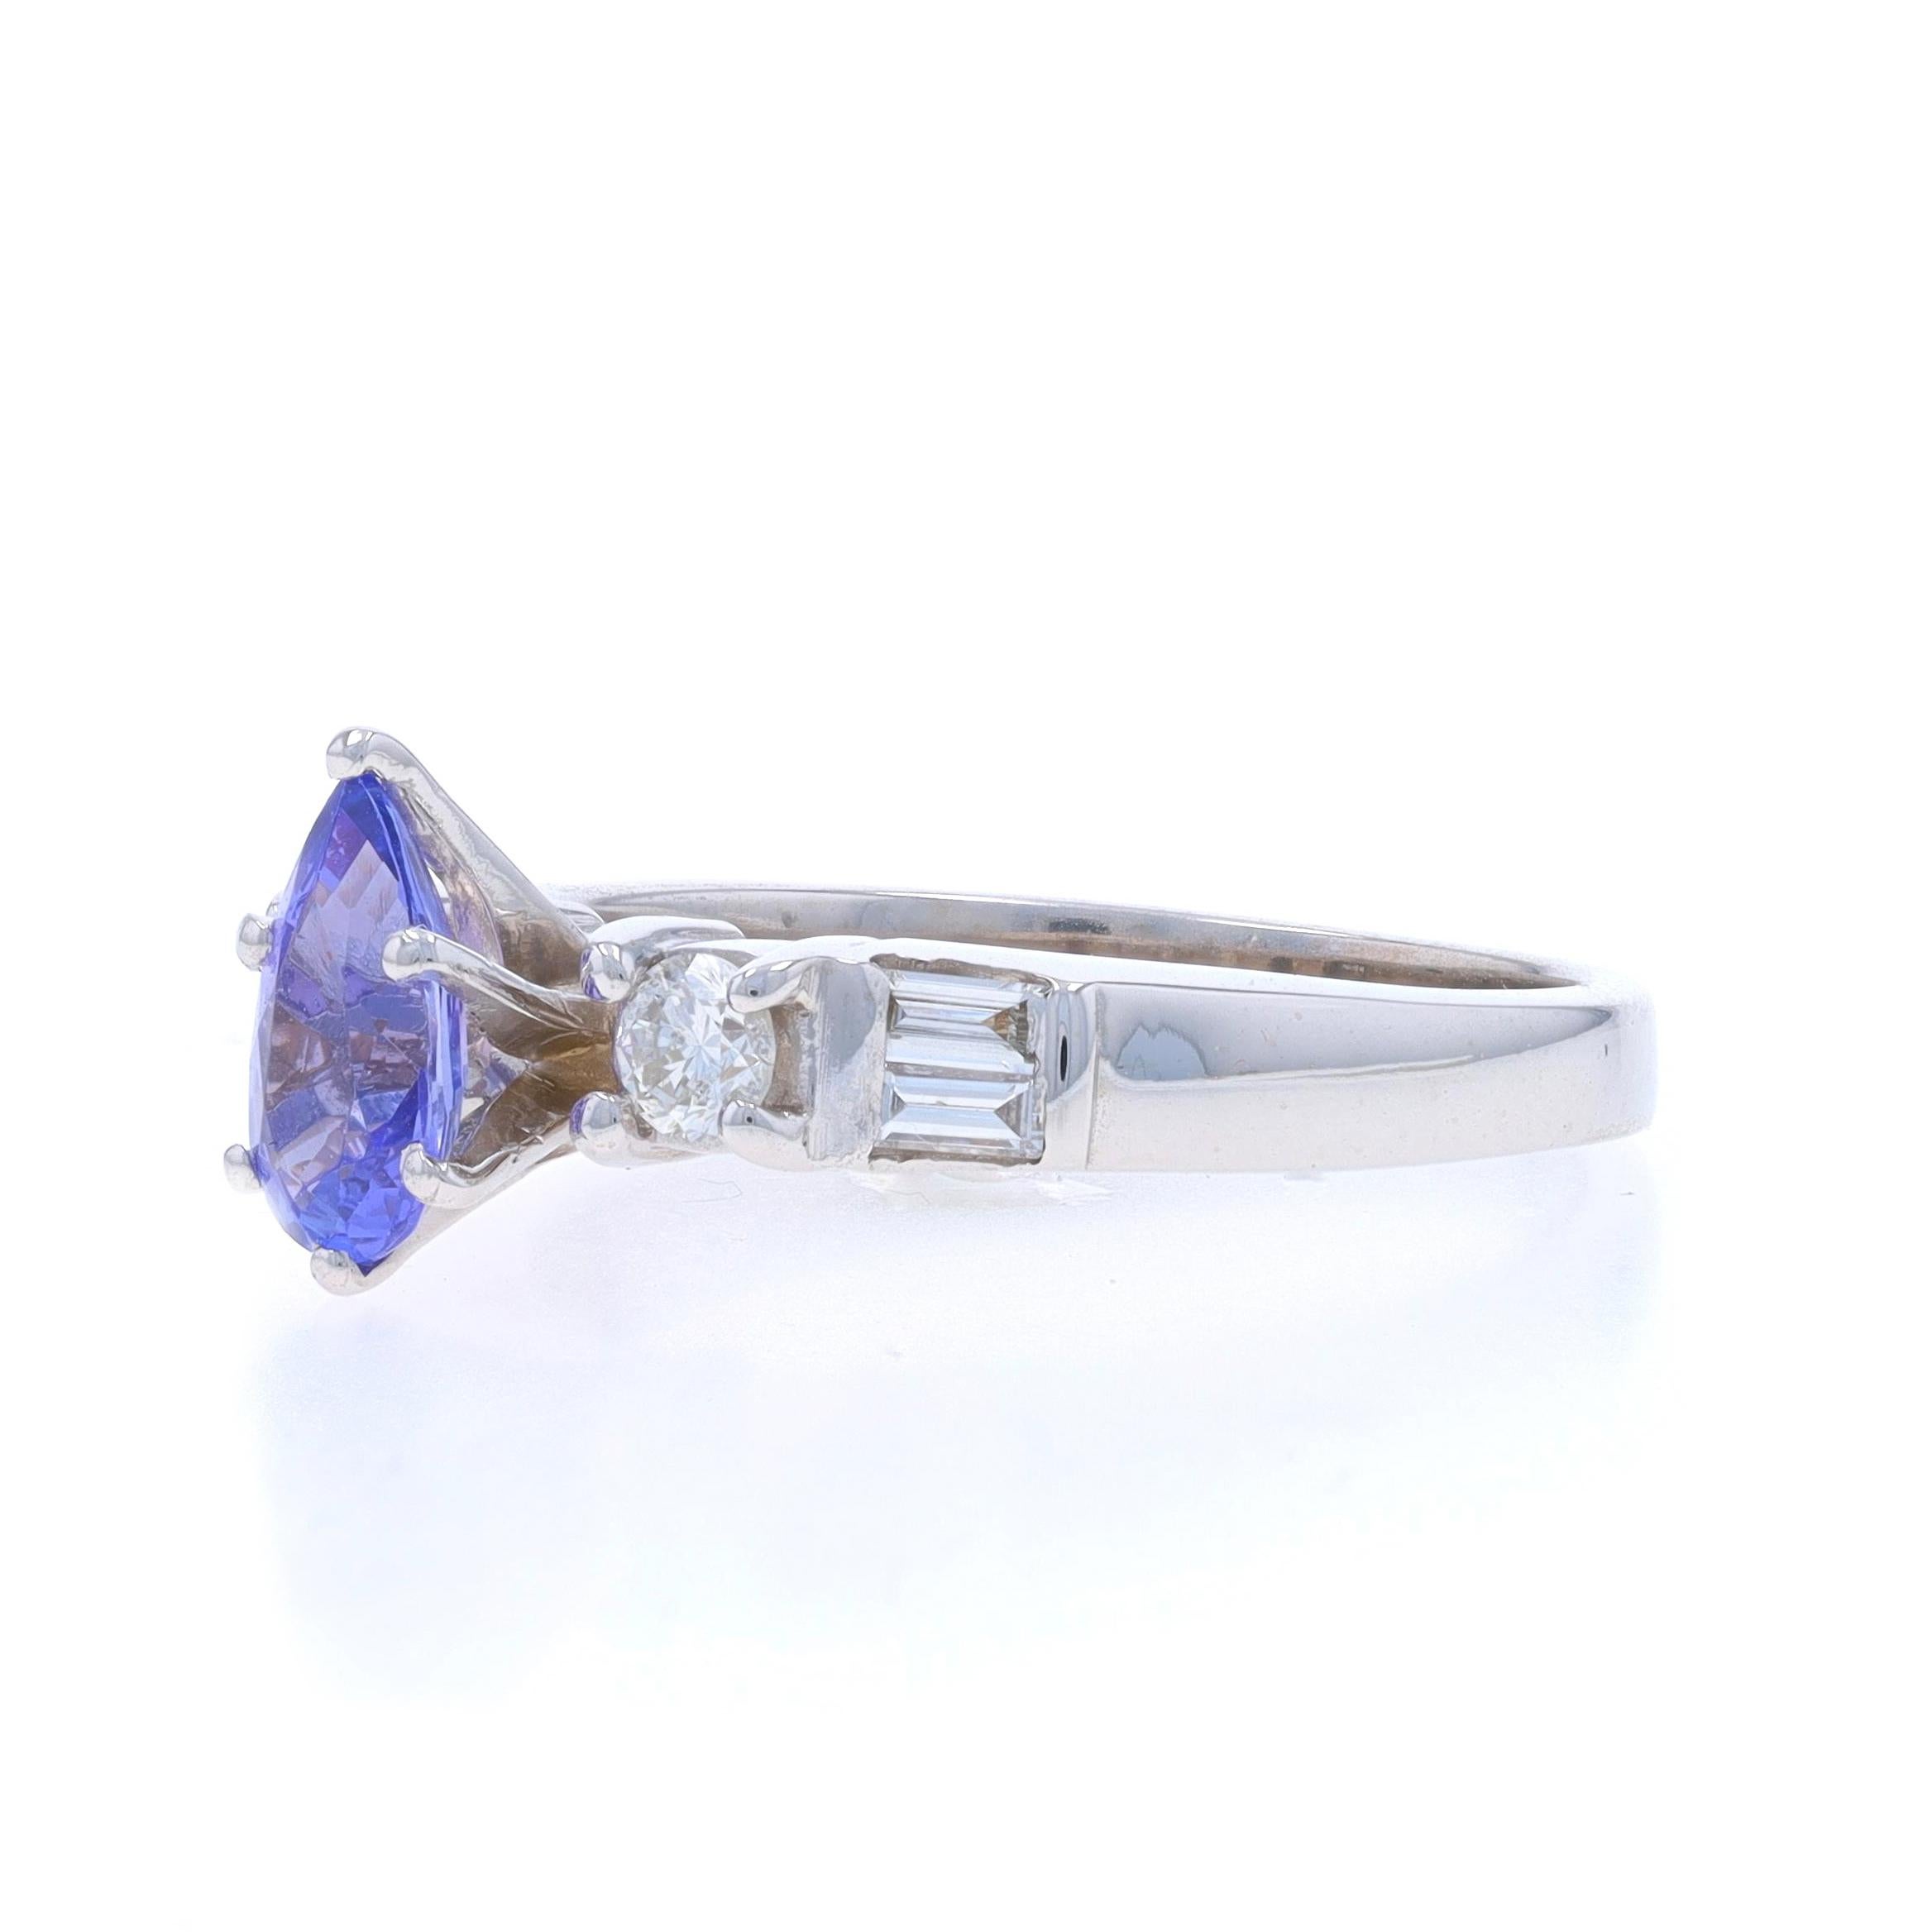 White Gold Tanzanite Diamond Ring - 14k Pear 1.26ctw Engagement In Excellent Condition For Sale In Greensboro, NC